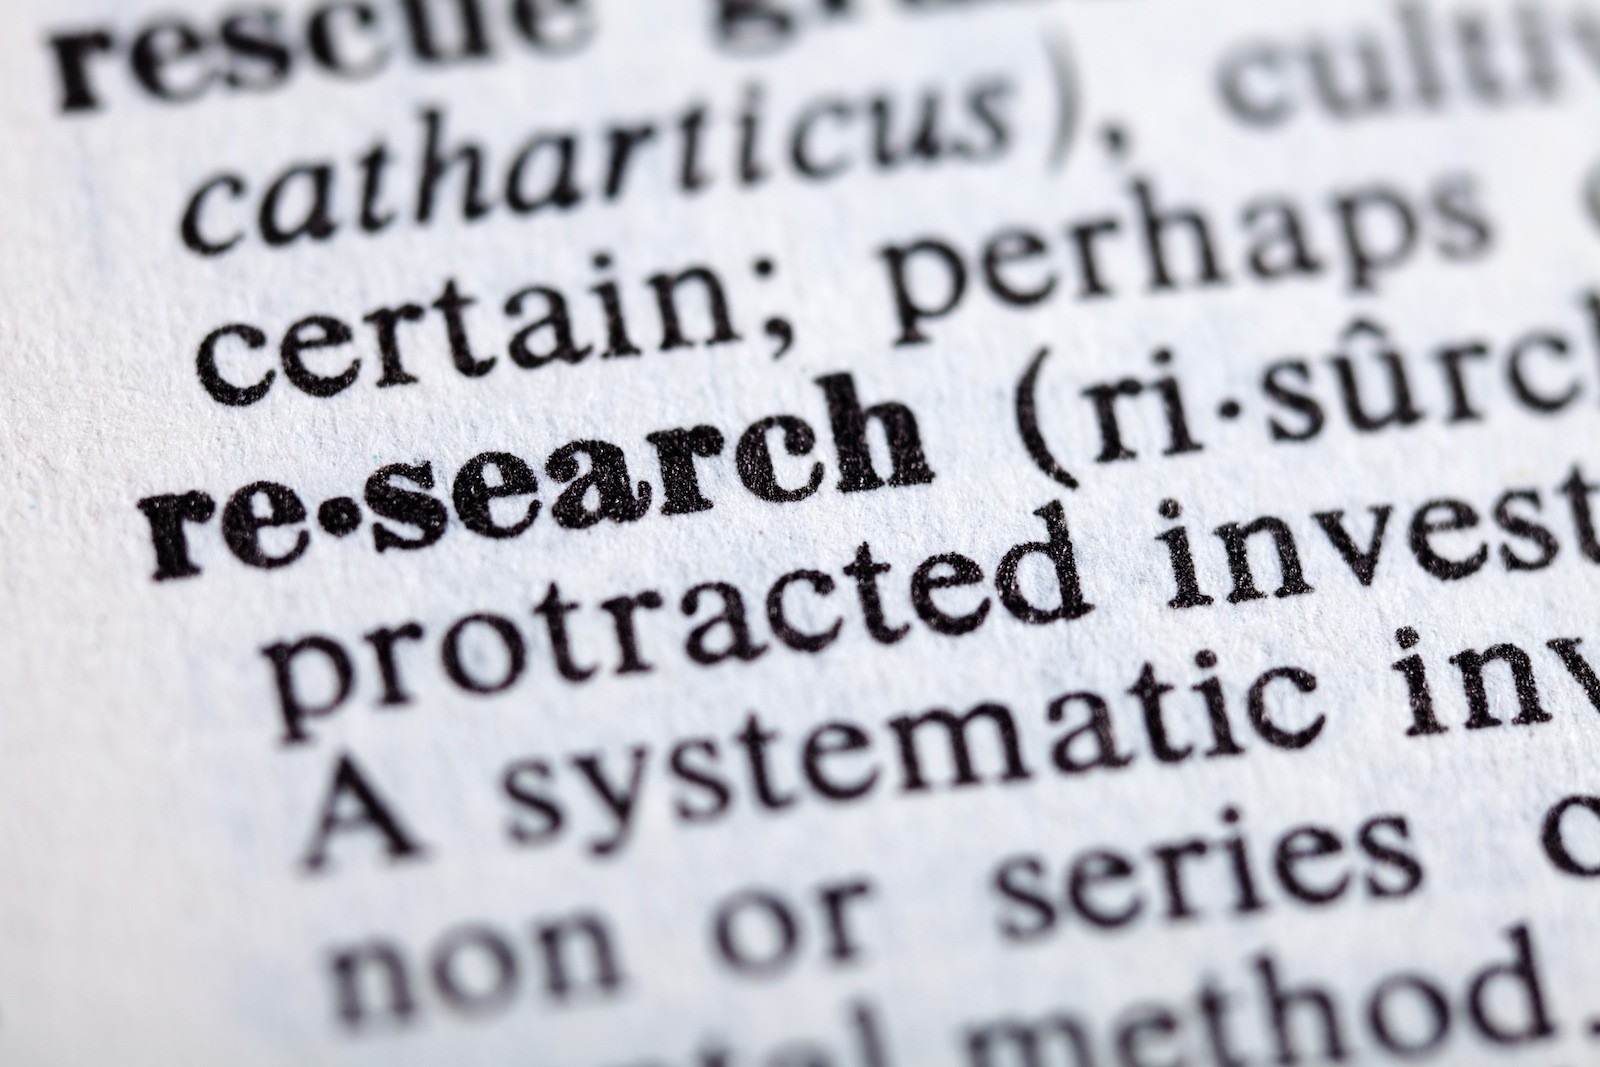 Dictionary definition of the word research.